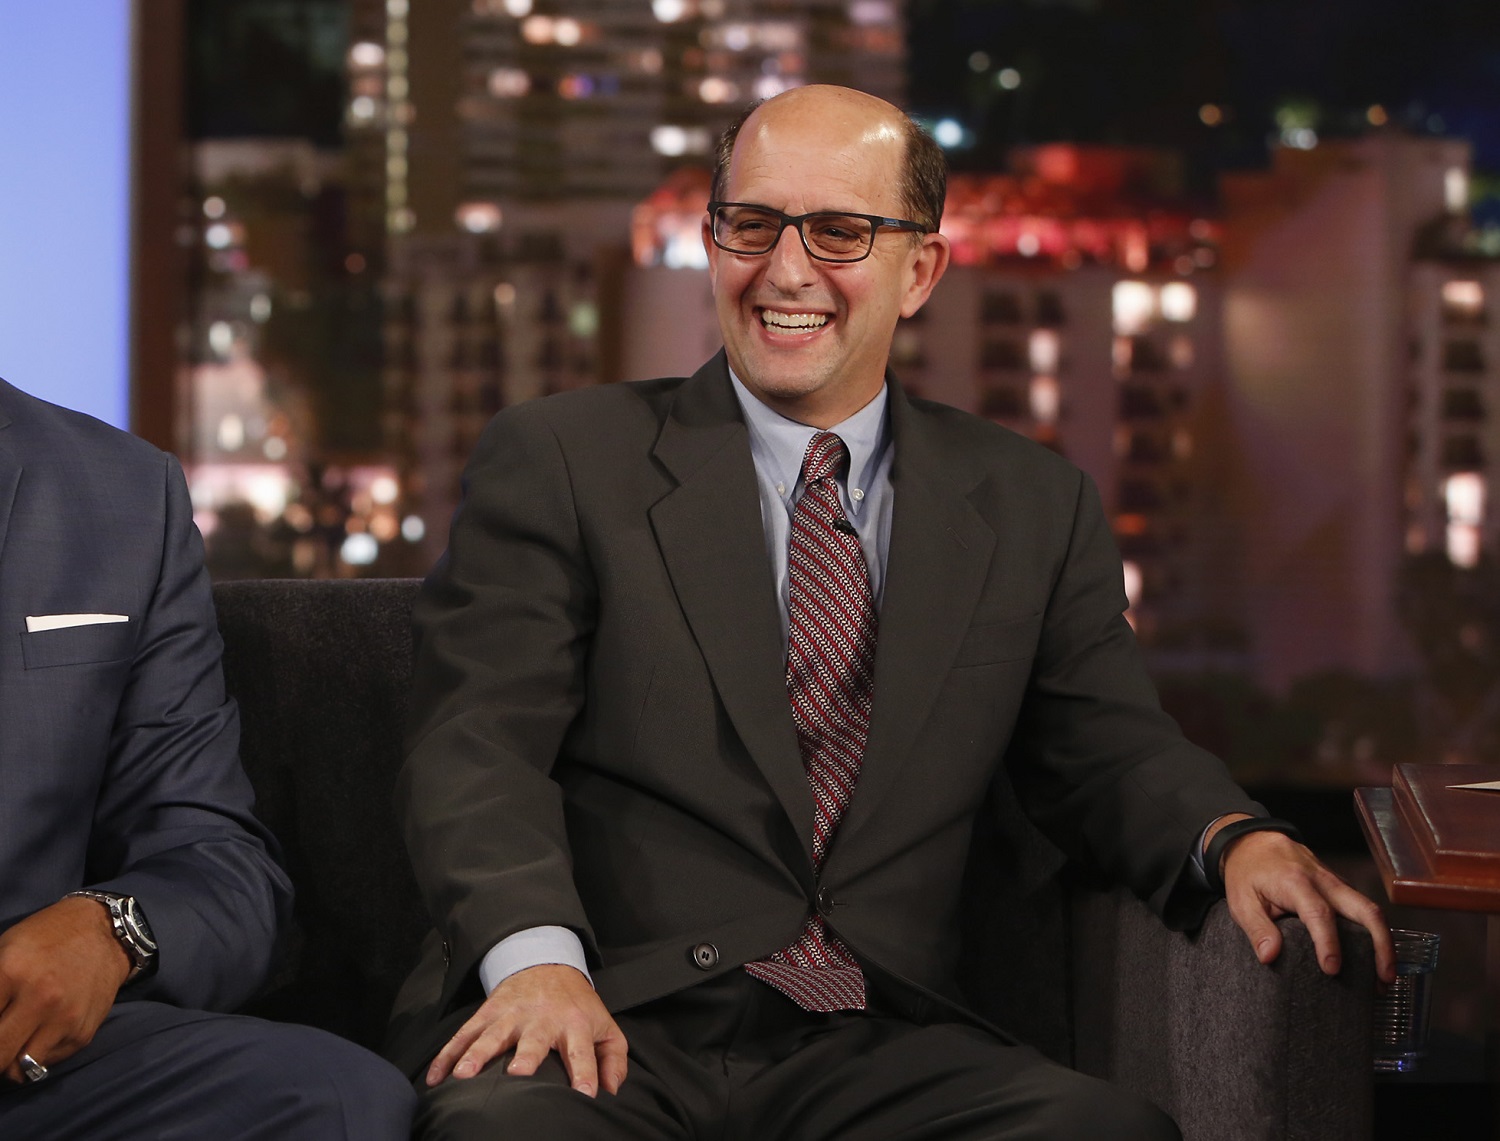 ESPN and ABC basketball analyst Jeff Van Gundy on the set of 'Jimmy Kimmel Live.' | Randy Holmes/Disney General Entertainment Content via Getty Images